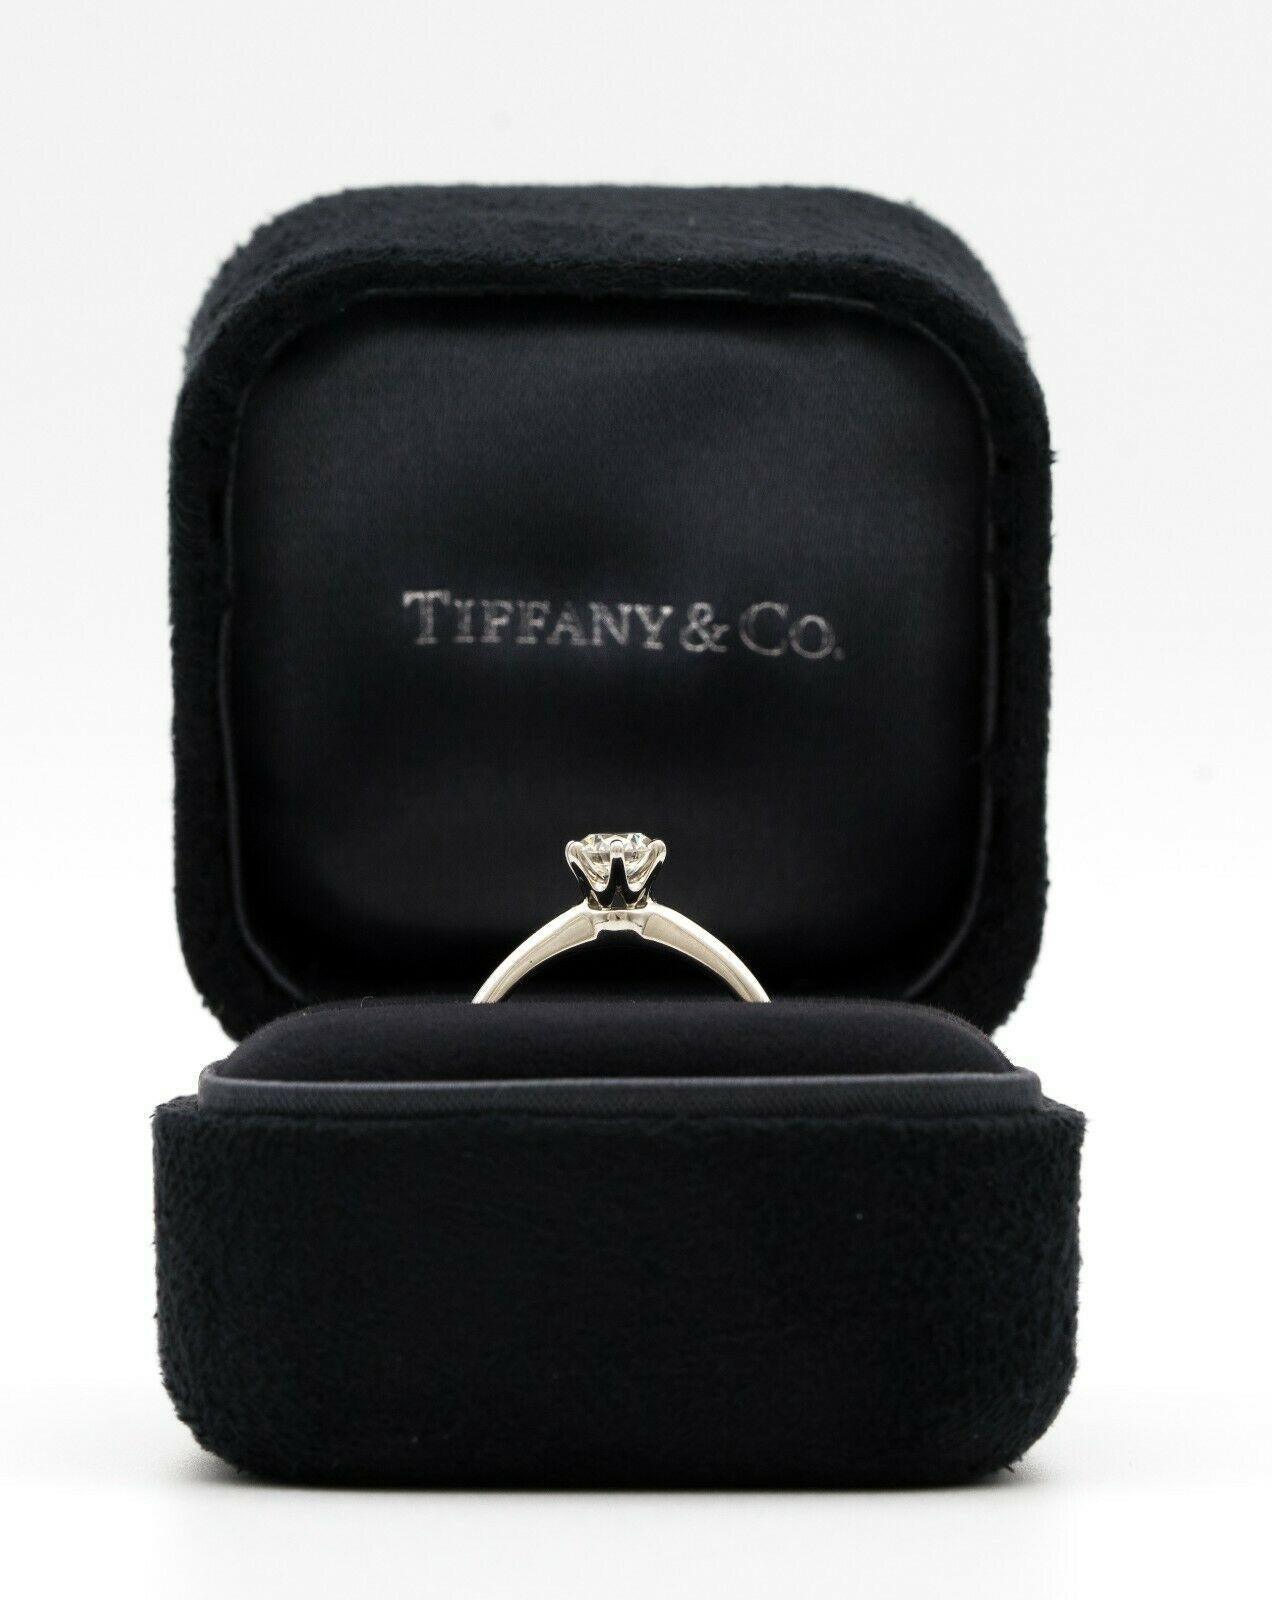 Tiffany & Co. Diamond Engagement ring with Tiffany & Co. Hallmark, featuring a .46 ct Center, graded H color , and VVS1 Clarity, in Platinum.
Crown Inscription: T&Co. 012130441
Signed: Tiffany & Co
Stamped: 32847064 , D.046CT, PT950
Includes